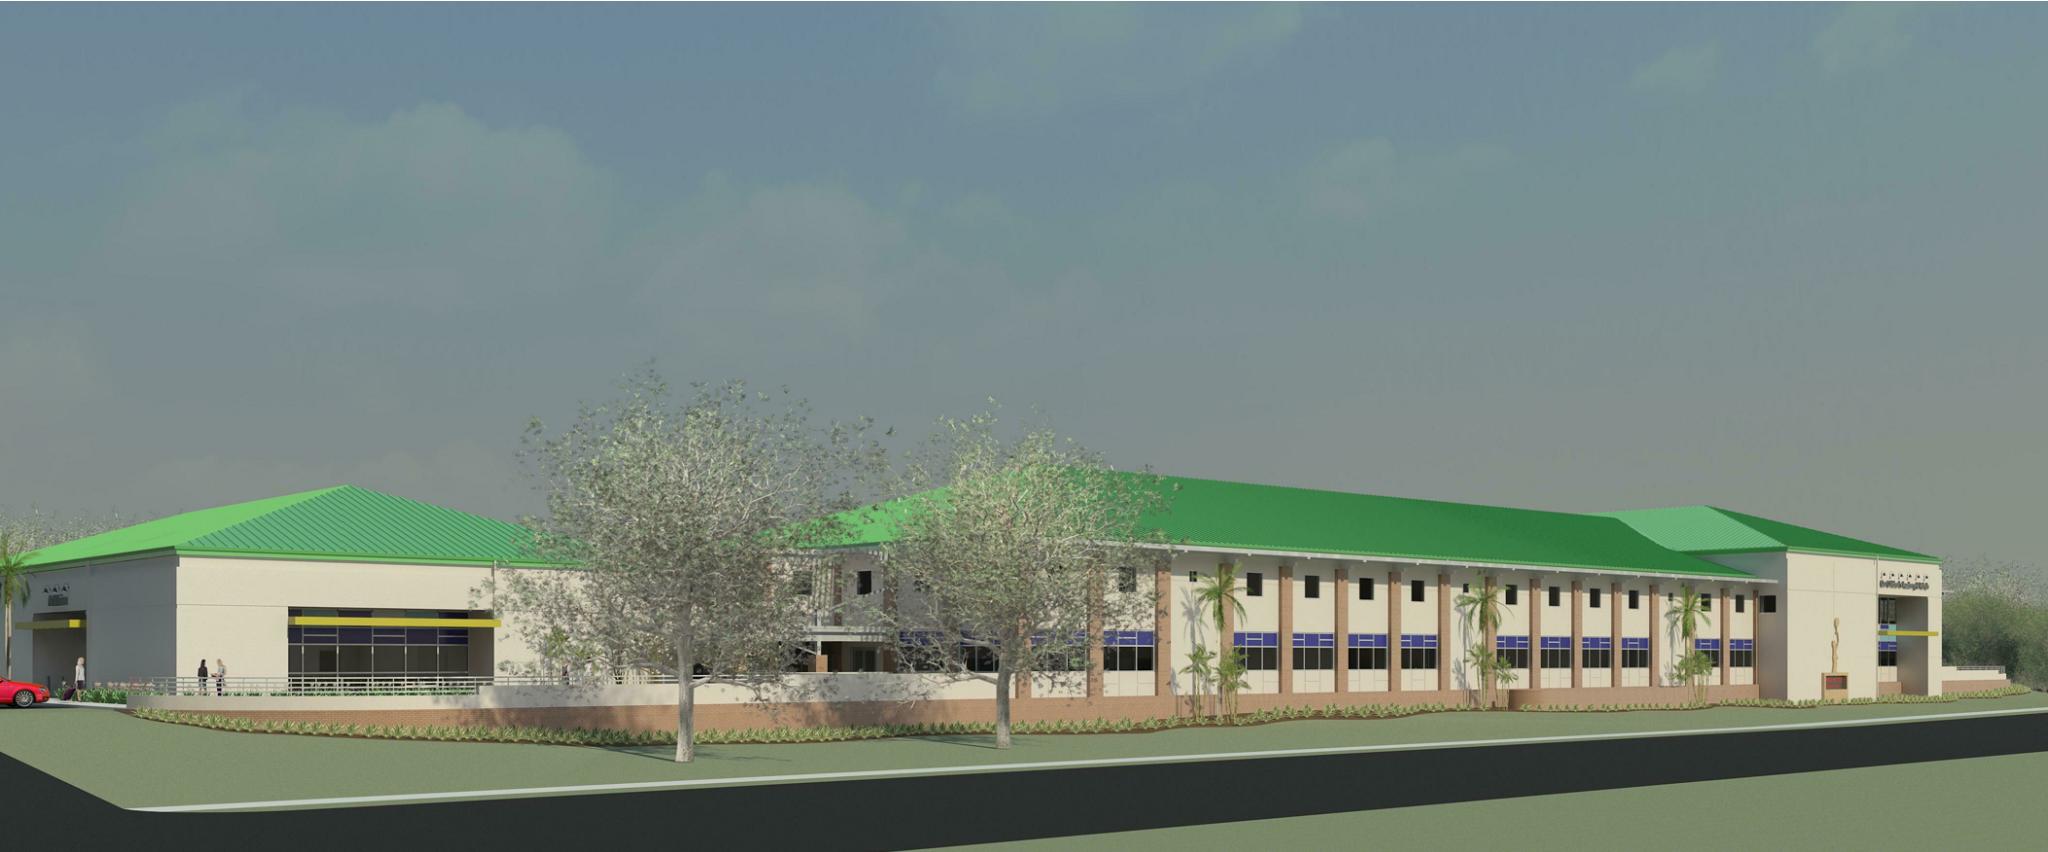 Proposed School 1 Lake Wales Parlier Crews Architects